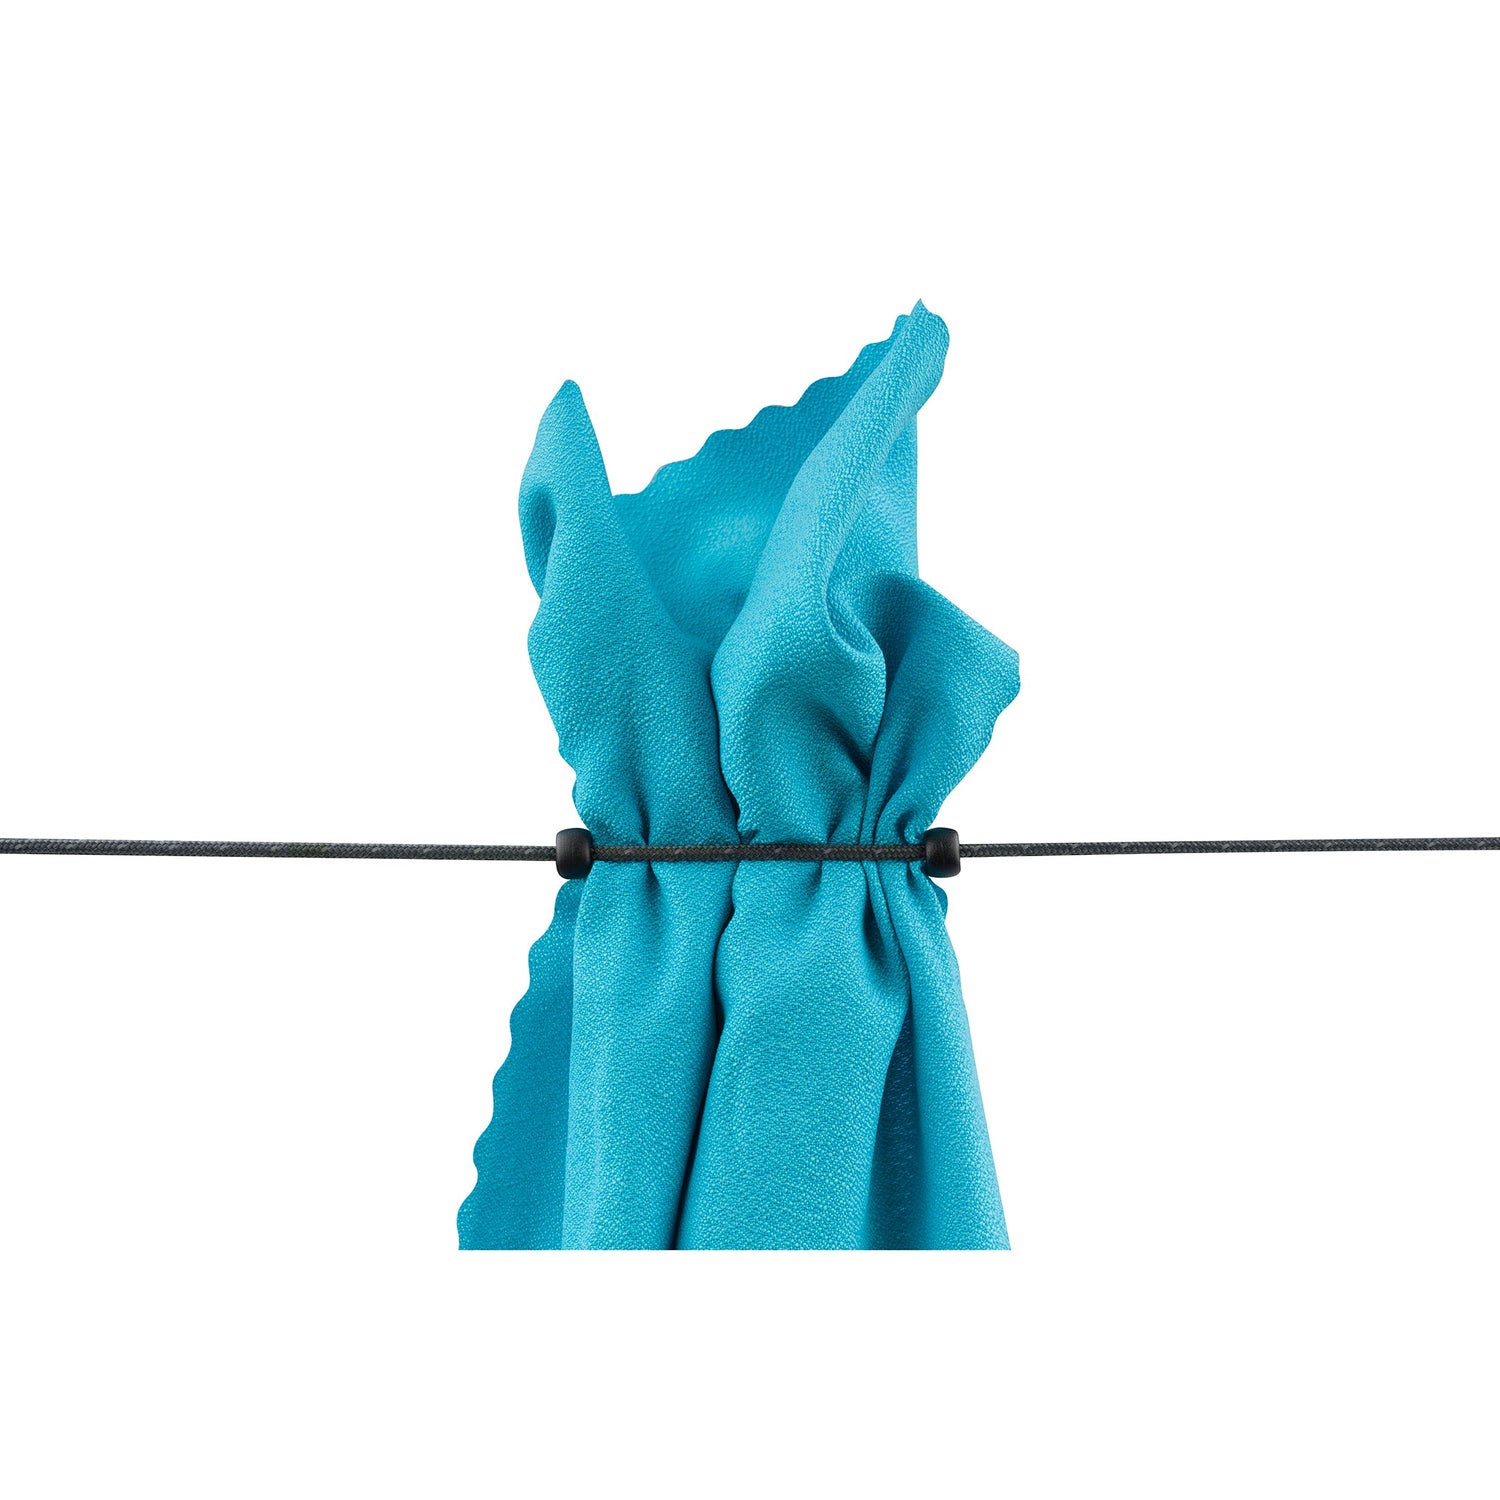 Learn how to tie a bow tie (with video): Clotheslines 